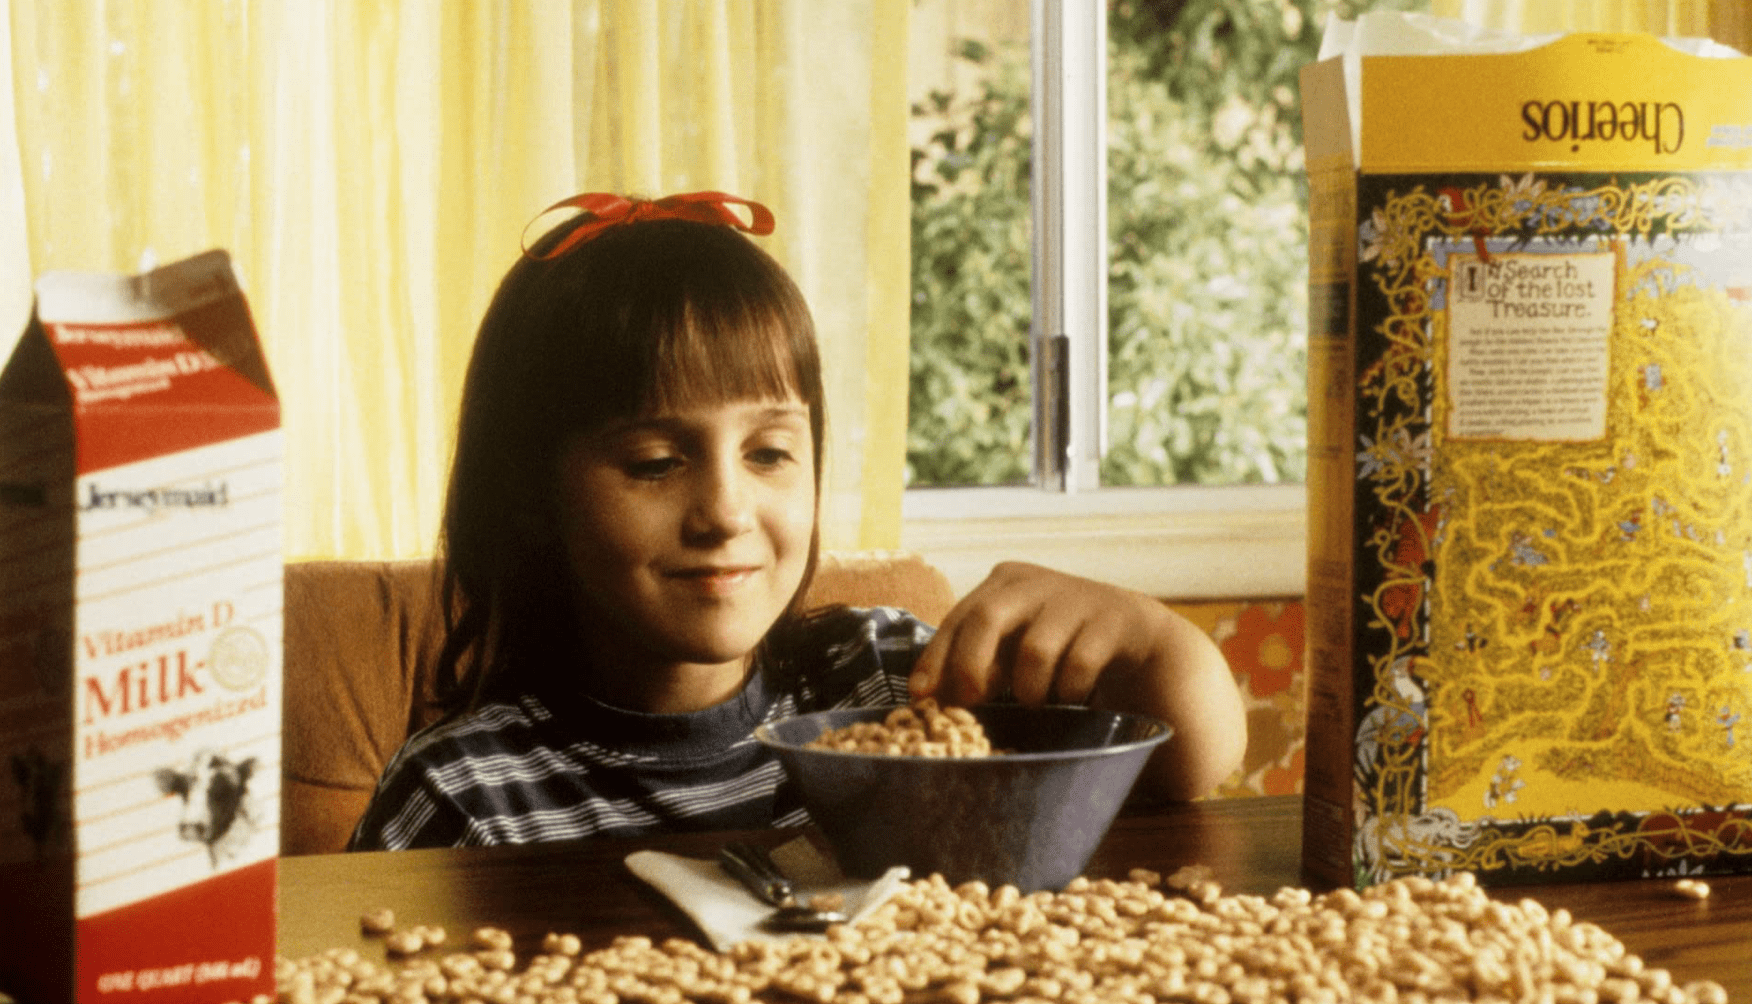 A young girl plays with her Cheerios in this image from Netflix